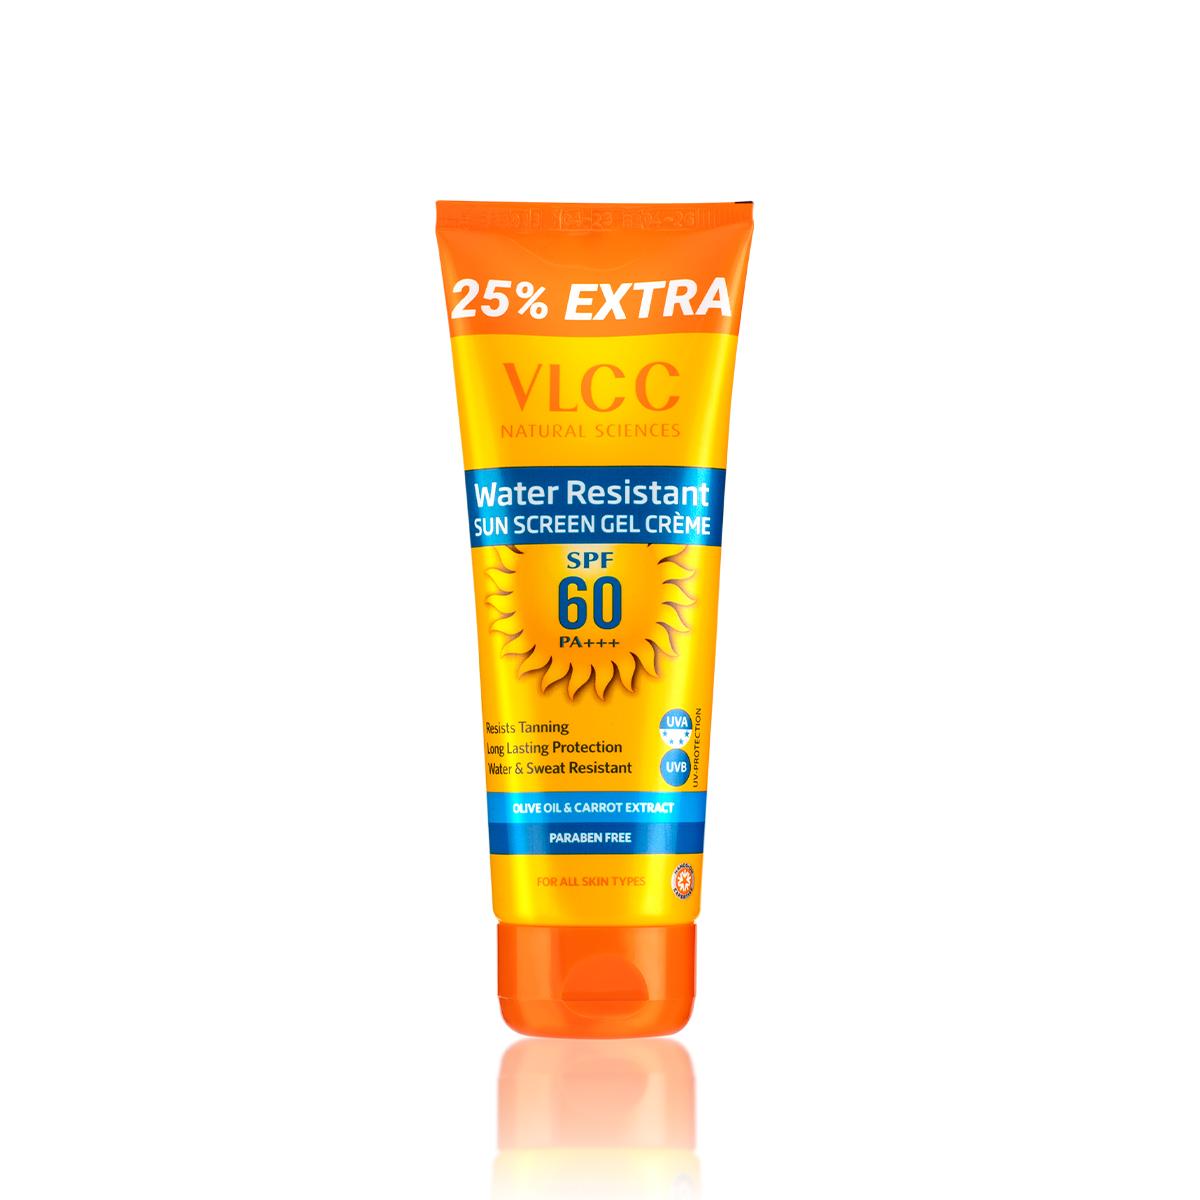 VLCC Water Resistant SPF 60 PA+++ Sunscreen - Maximum Sun Protection for All-Day Outdoor Activities